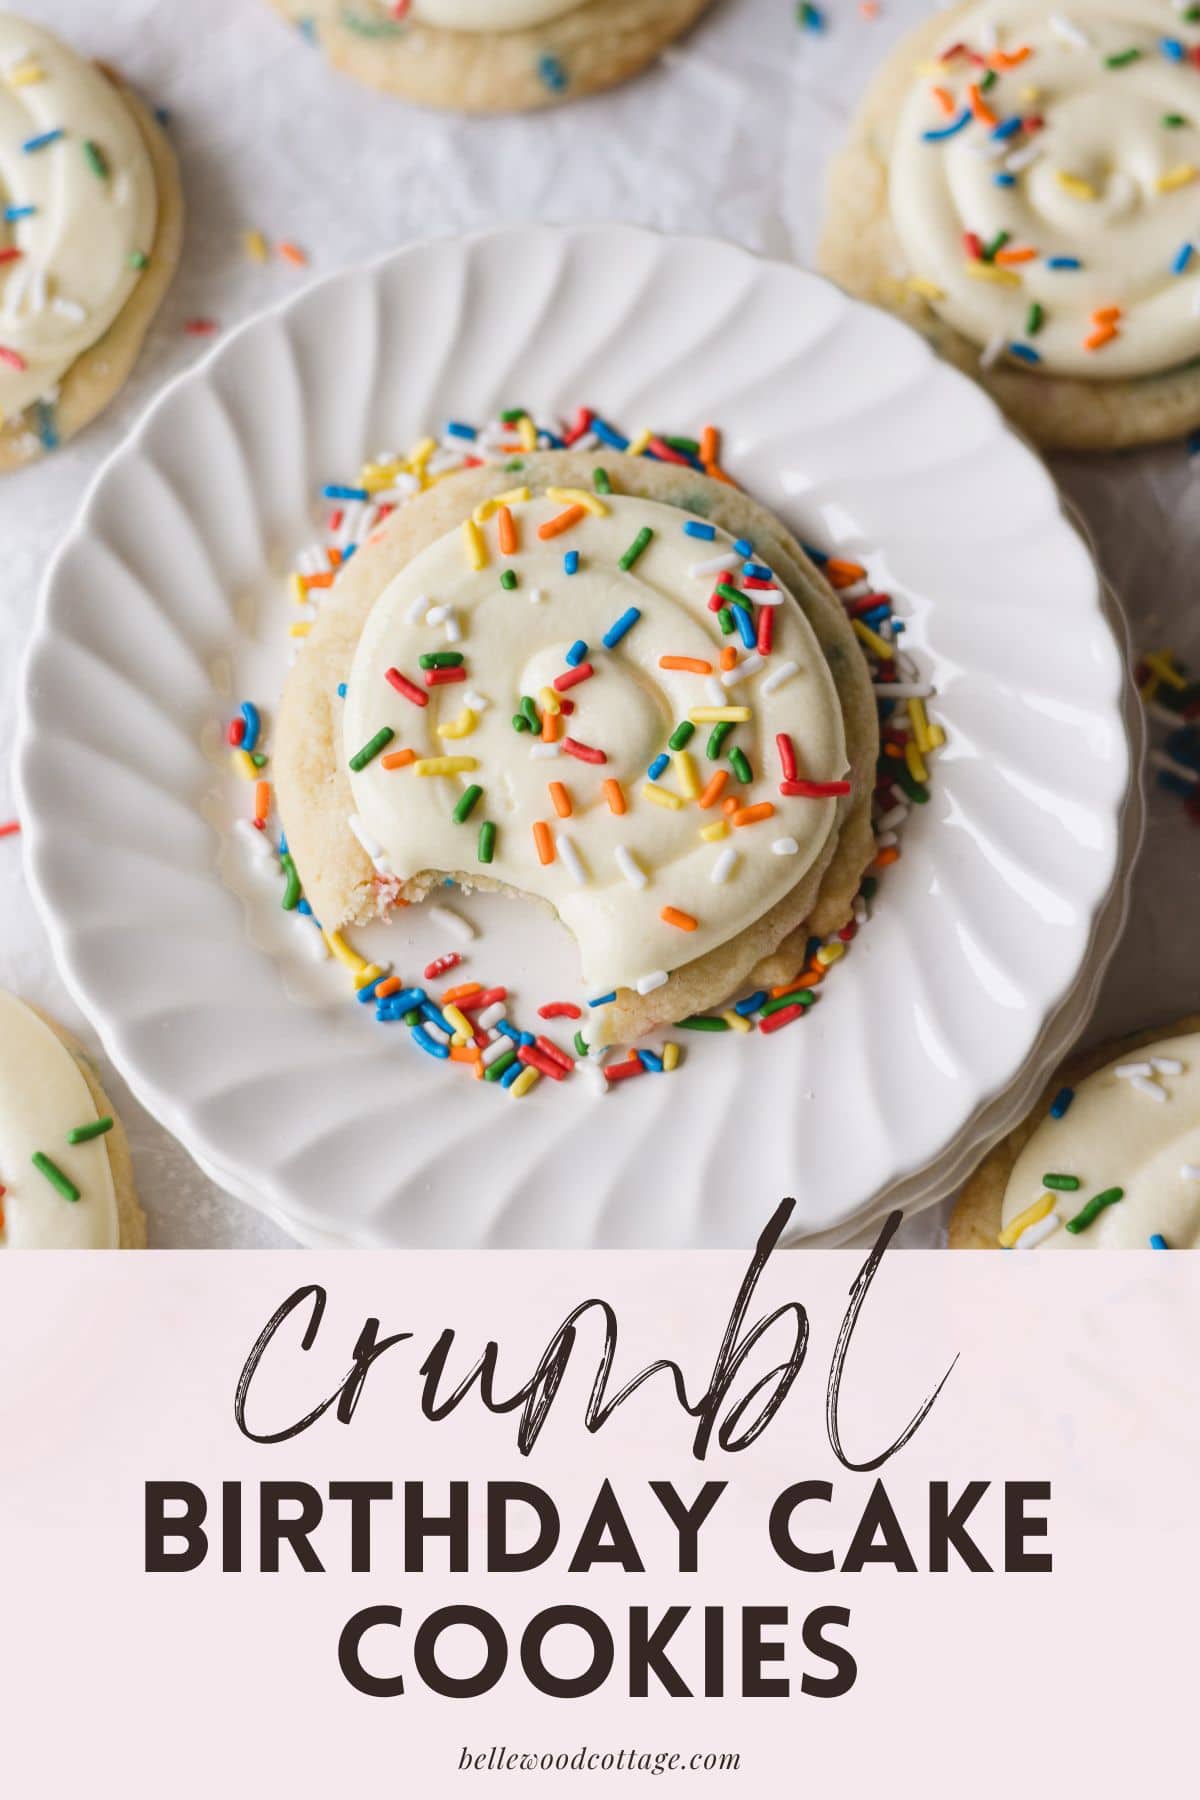 A frosted funfetti cookie topped with sprinkles with a bite removed and the words, "Crumbl Birthday Cake Cookies."